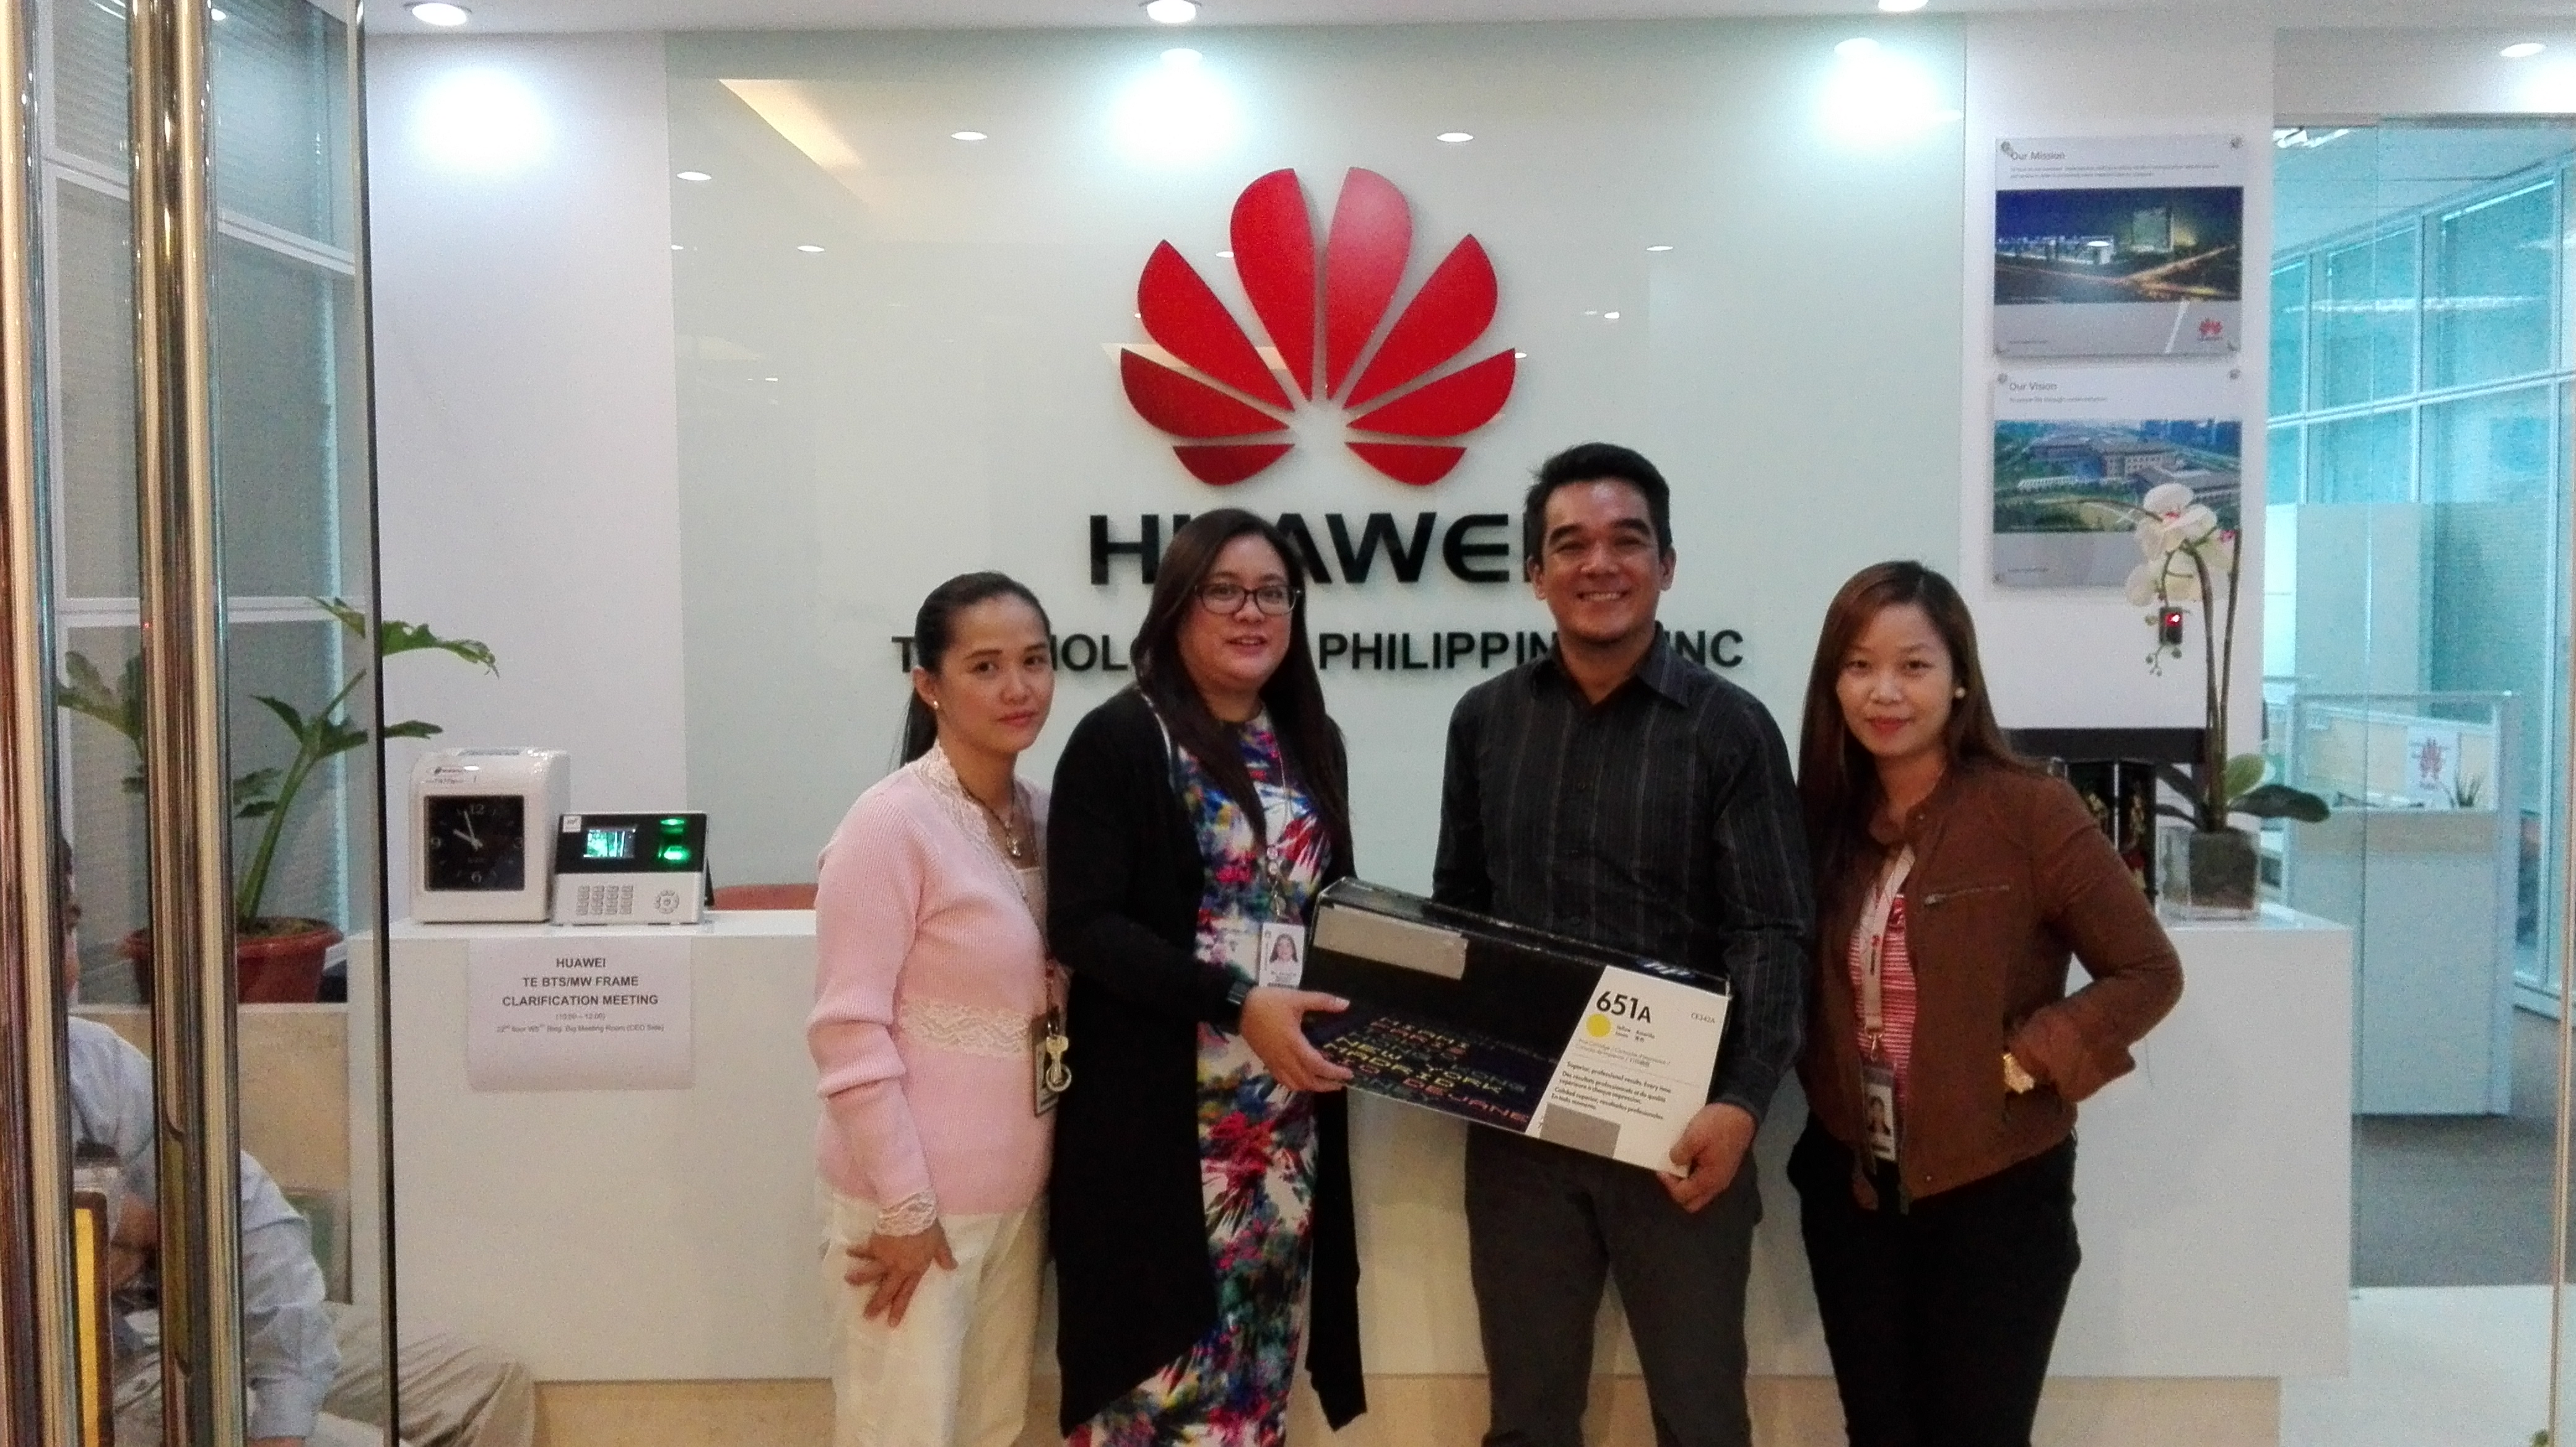 Huawei Technologies Philippines shows support for environmental sustainability through participation in Globe Telecom’s Project 1 Phone. (L-R) Huawei Fixed Assets Manager Angel Fabelico, Huawei PR Manager  Karenina Buenafe and Huawei Procurement Specialist Jocelyn Tesnado turns over a used toner cartridge to Patrick Erestain, Globe Corporate Social Responsibility Manager.